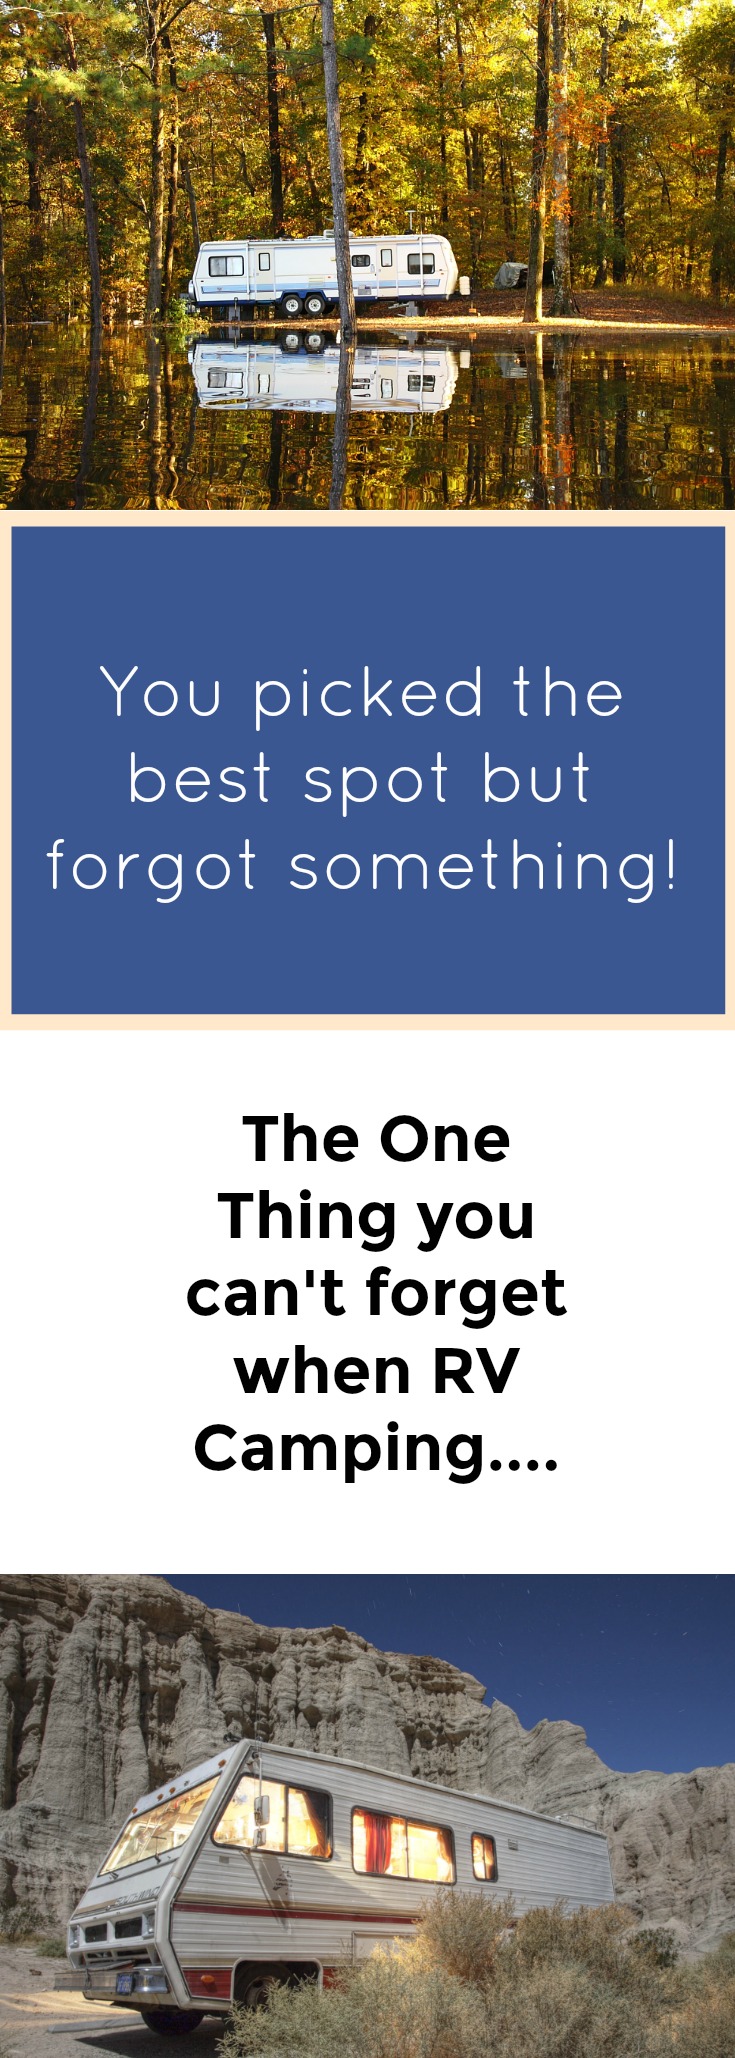 RV camping don't forget